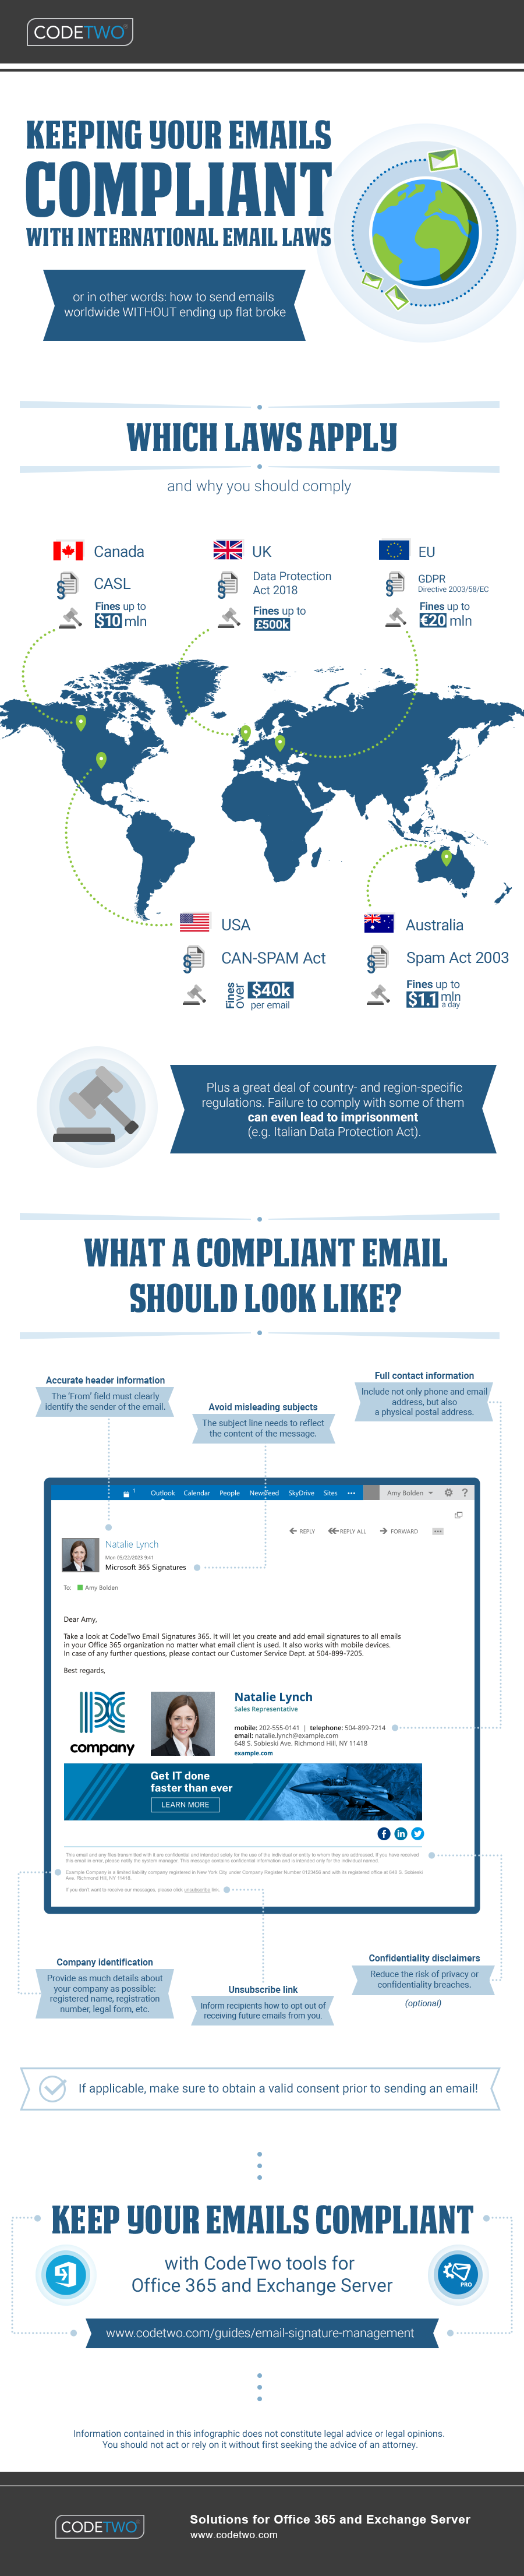 Keeping your emails legally compliant | Infographic